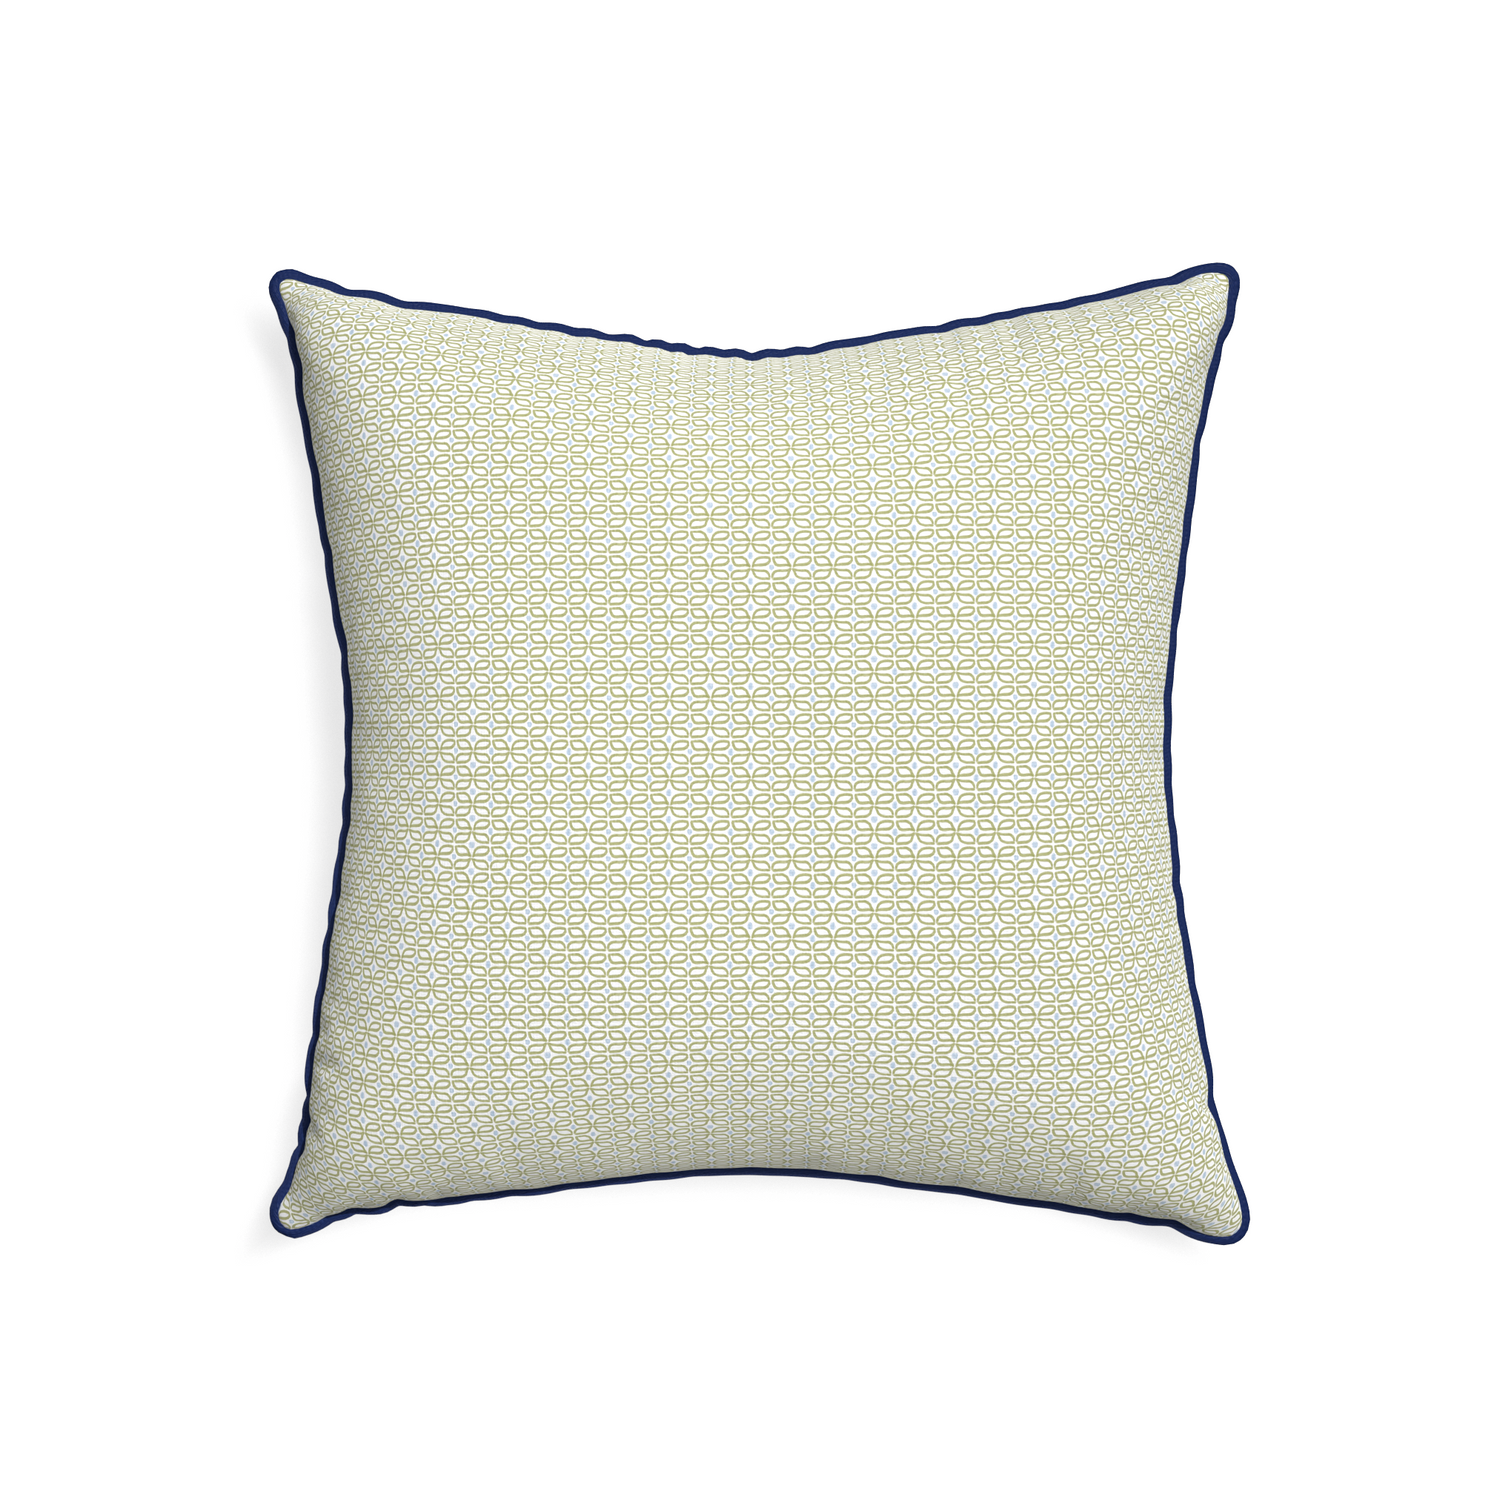 22-square loomi moss custom moss green geometricpillow with midnight piping on white background